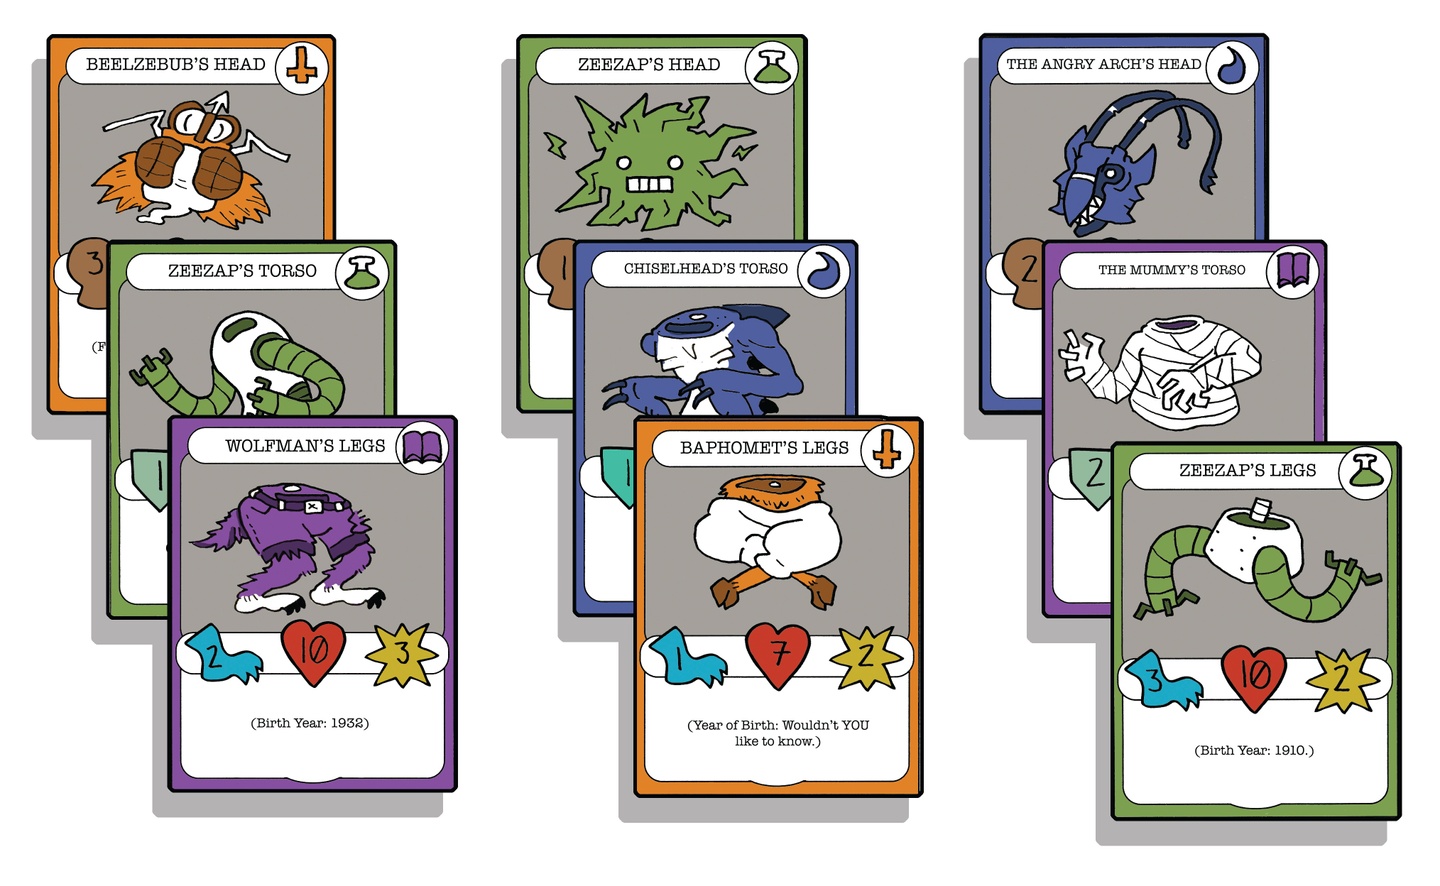 Three sets of illustrated cards, stacked in threes, of a monster's head, torso, and legs - for example Beelzebub's head, Zeezap's torso, and Wolfman's legs. Each card has different stats.